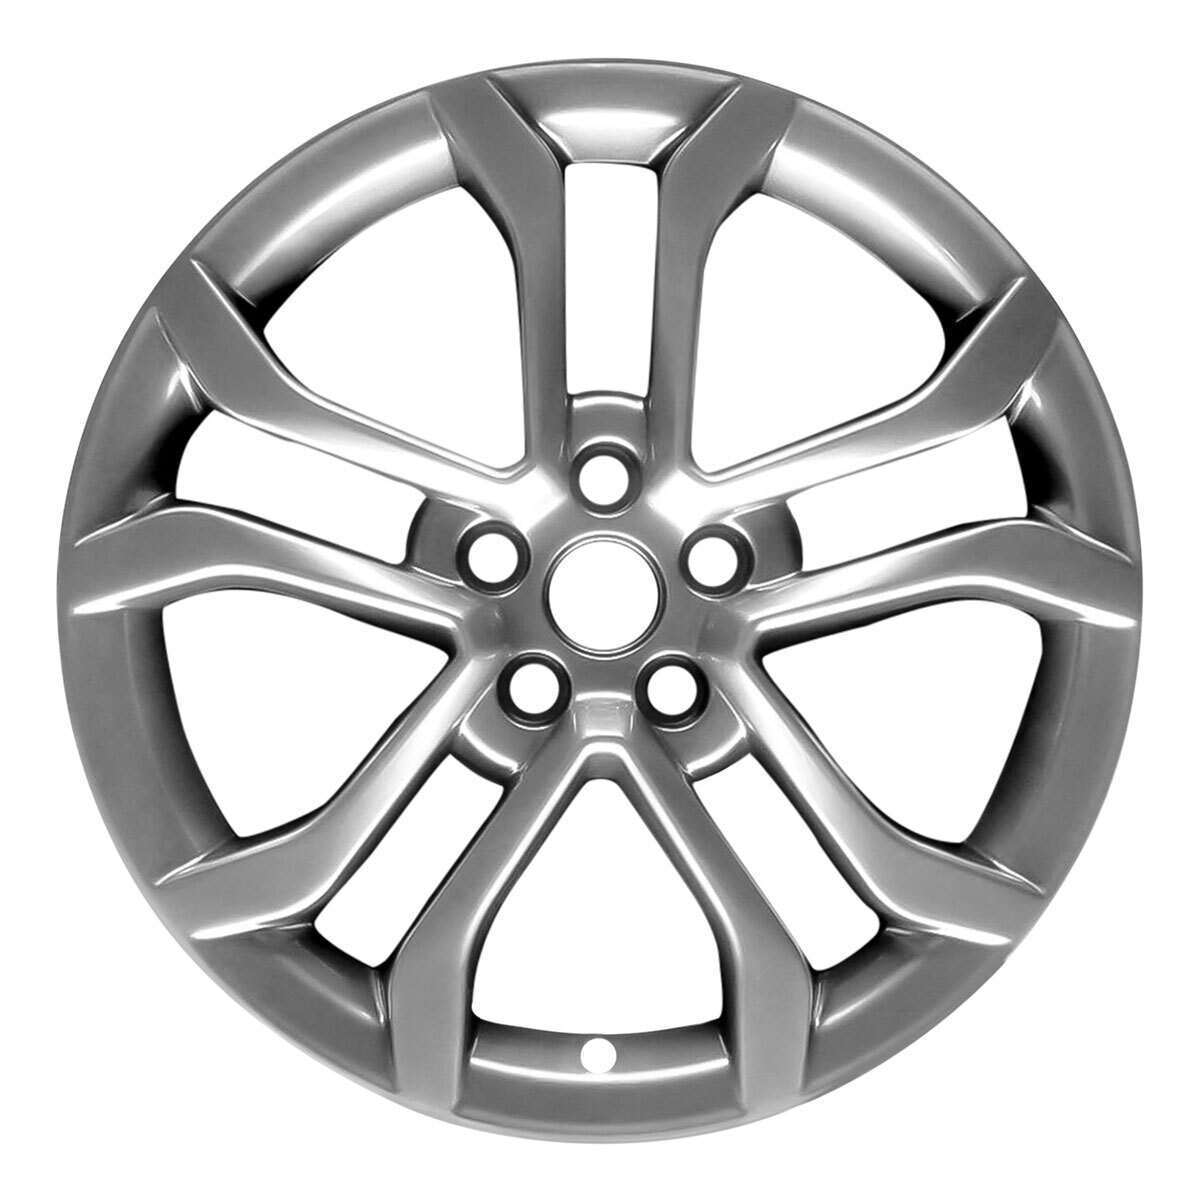 2018 Ford Fusion New 18" Replacement Wheel Rim RW10120S